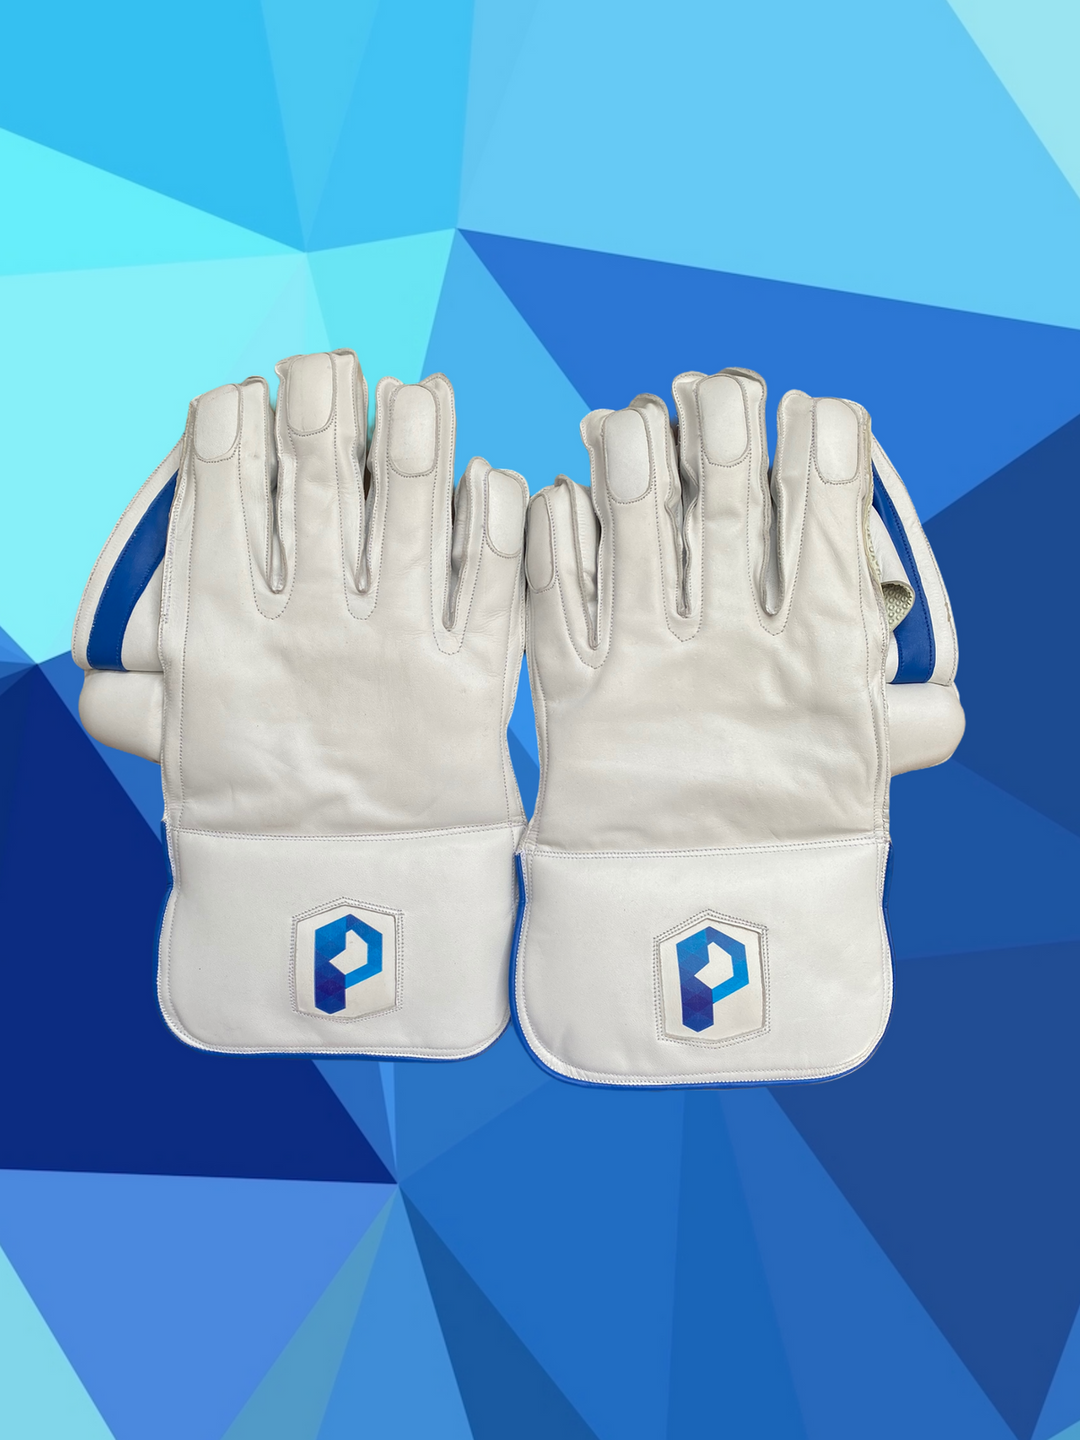 Prophecy Wicket Keeping Gloves